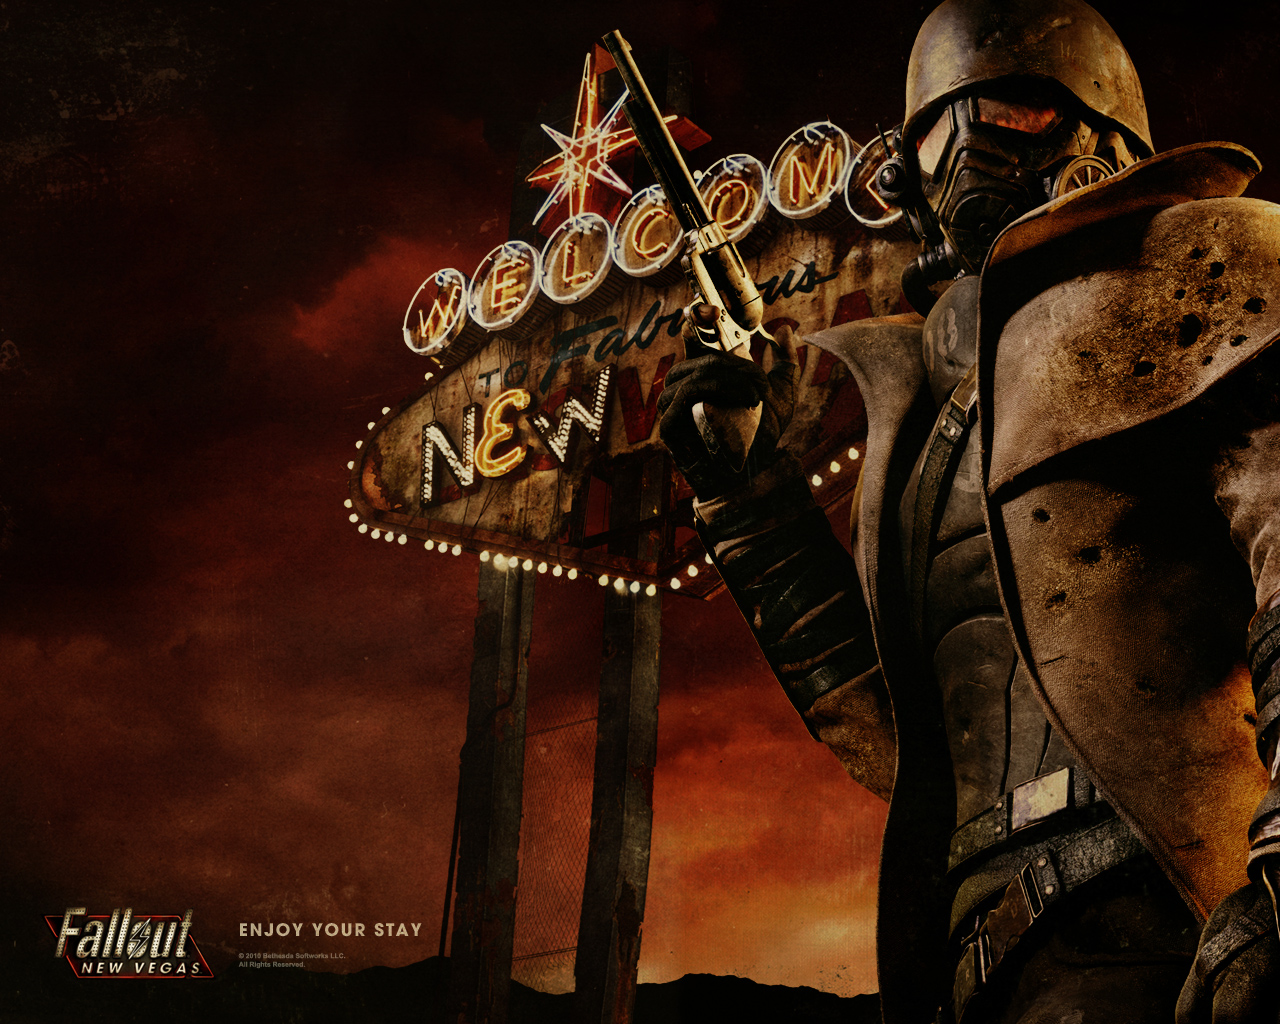 Free Download Home Wallpaper Fallout New Vegas Fallout New Vegas 1280x1024 For Your Desktop Mobile Tablet Explore 73 Fallout New Vegas Wallpaper Fallout 3 Wallpaper Fallout 4 Wallpaper 19x1080 Fallout 4 Hd Wallpaper